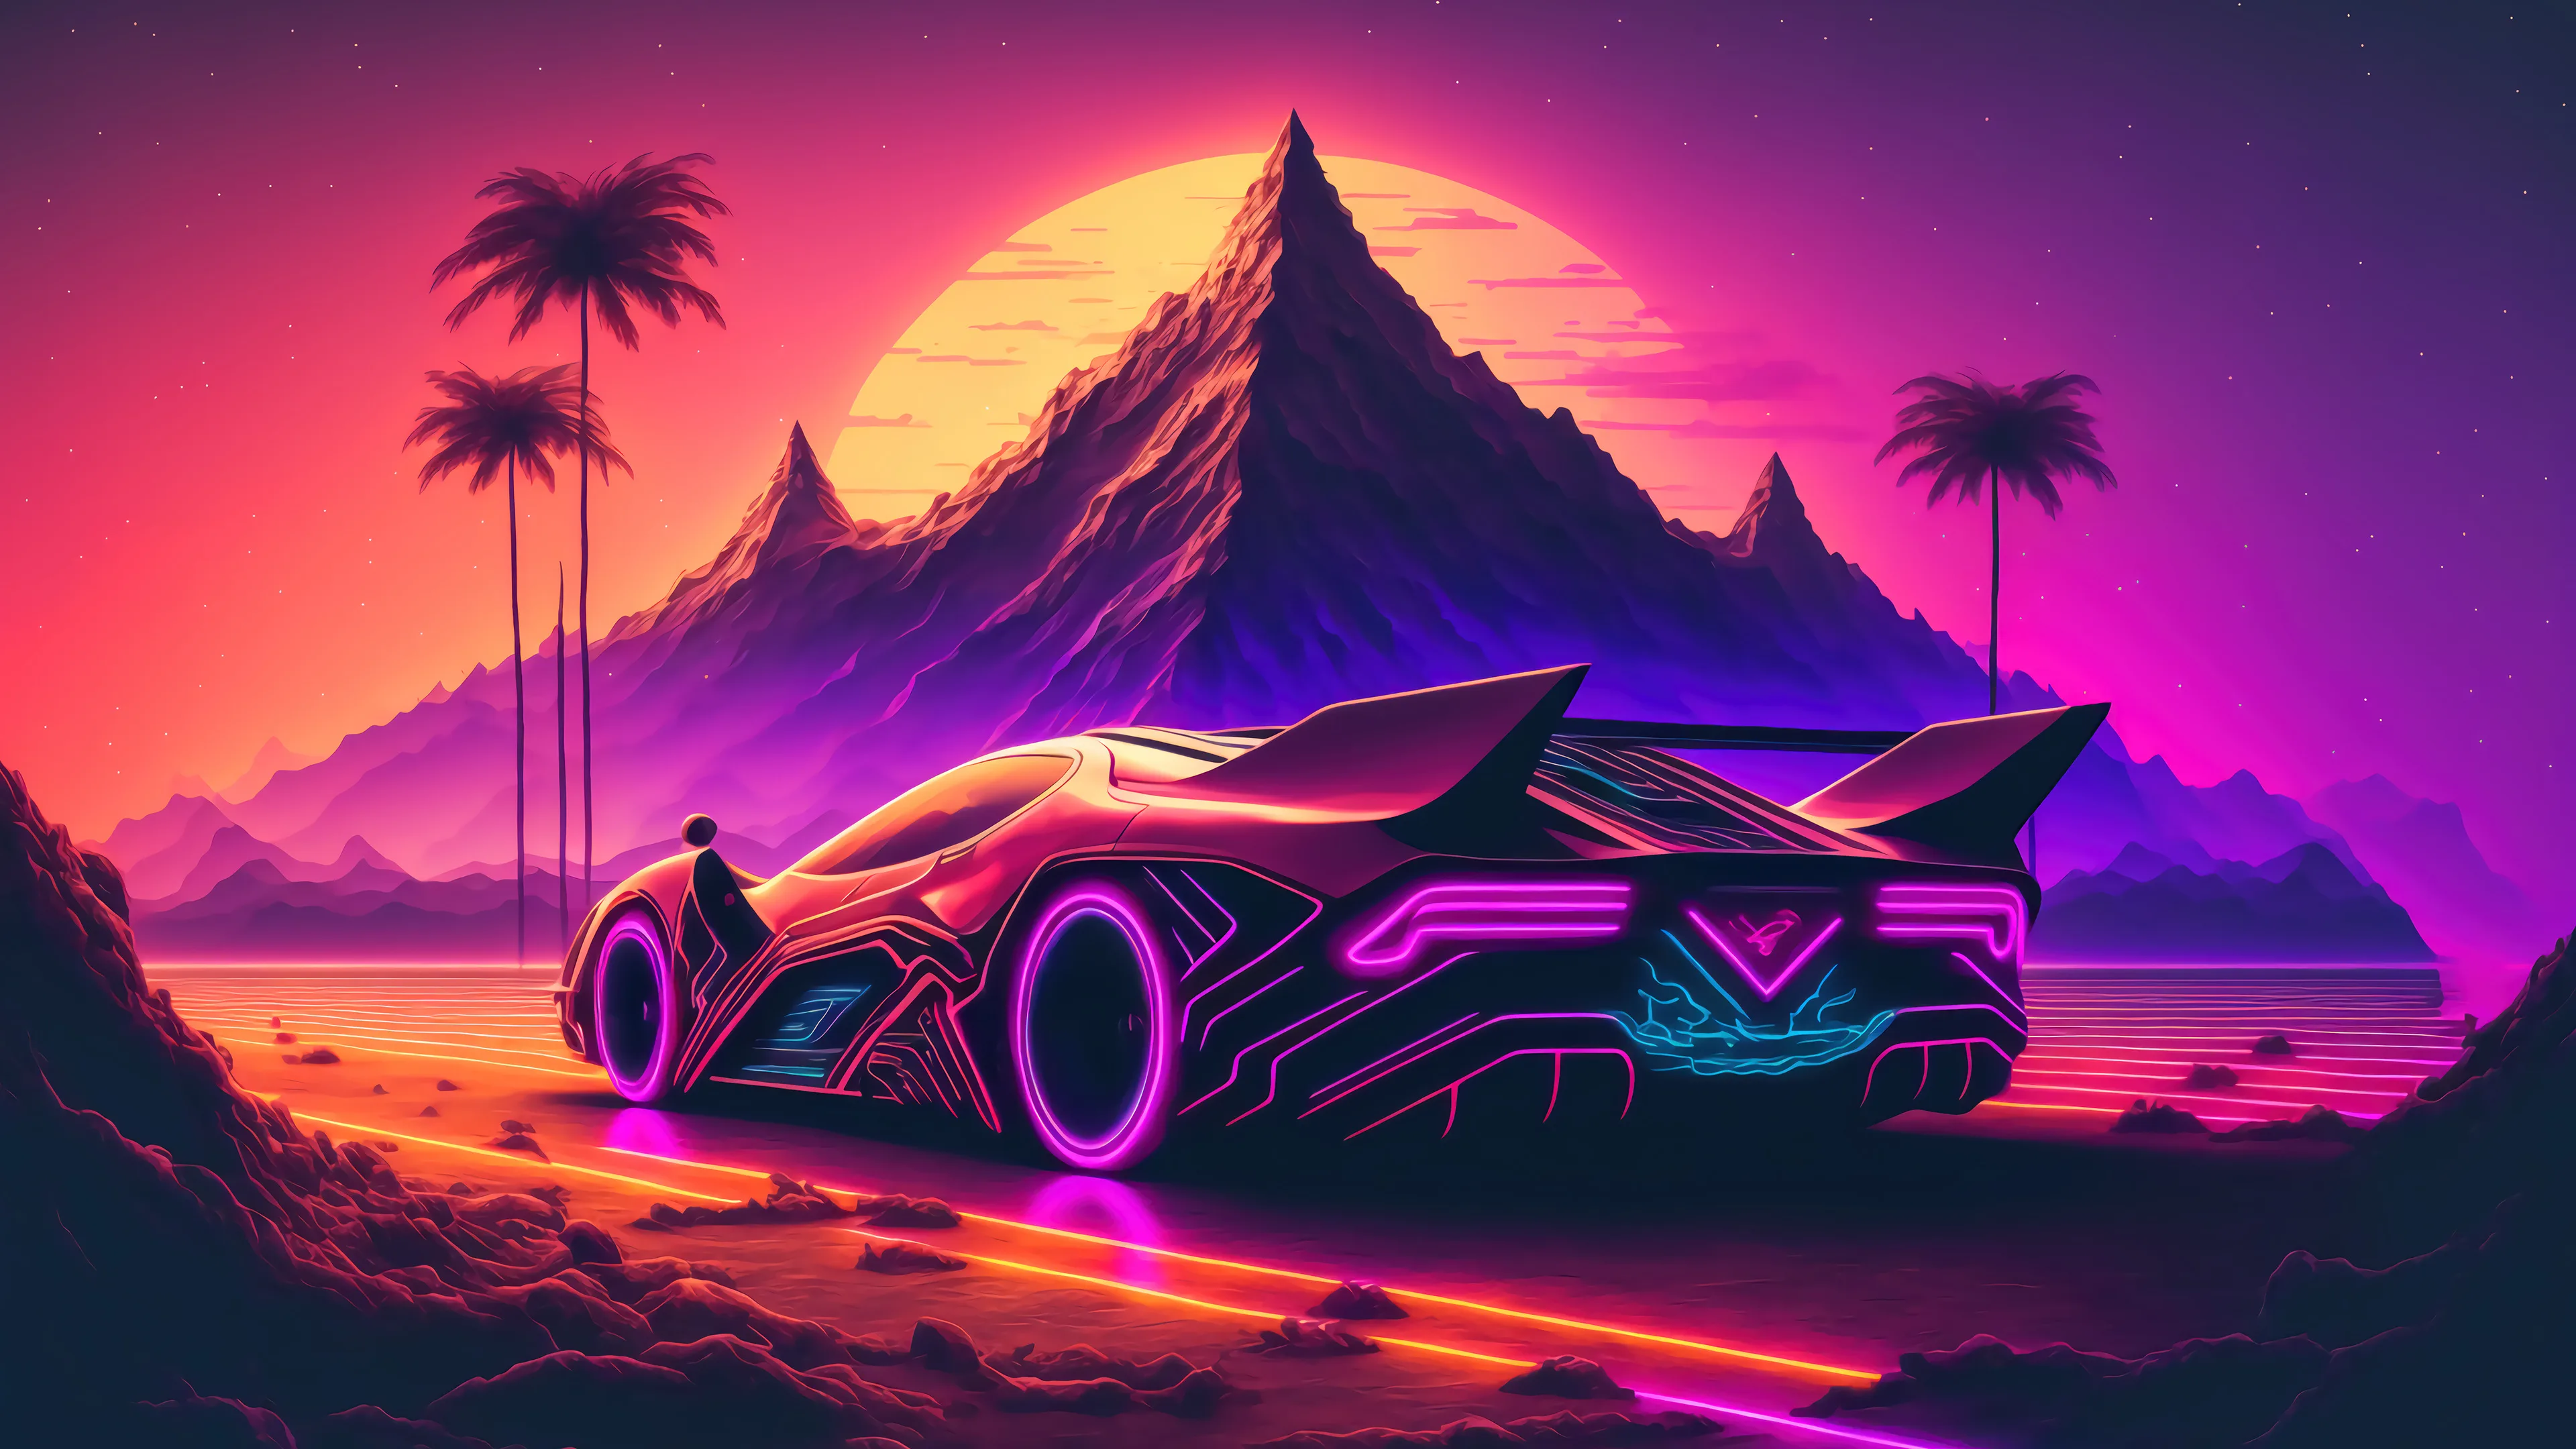 Futuristic Sports Car Sunset Scenery Digital Art 4K Wallpaper - Pixground -  Download High-Quality 4K Wallpapers For Free